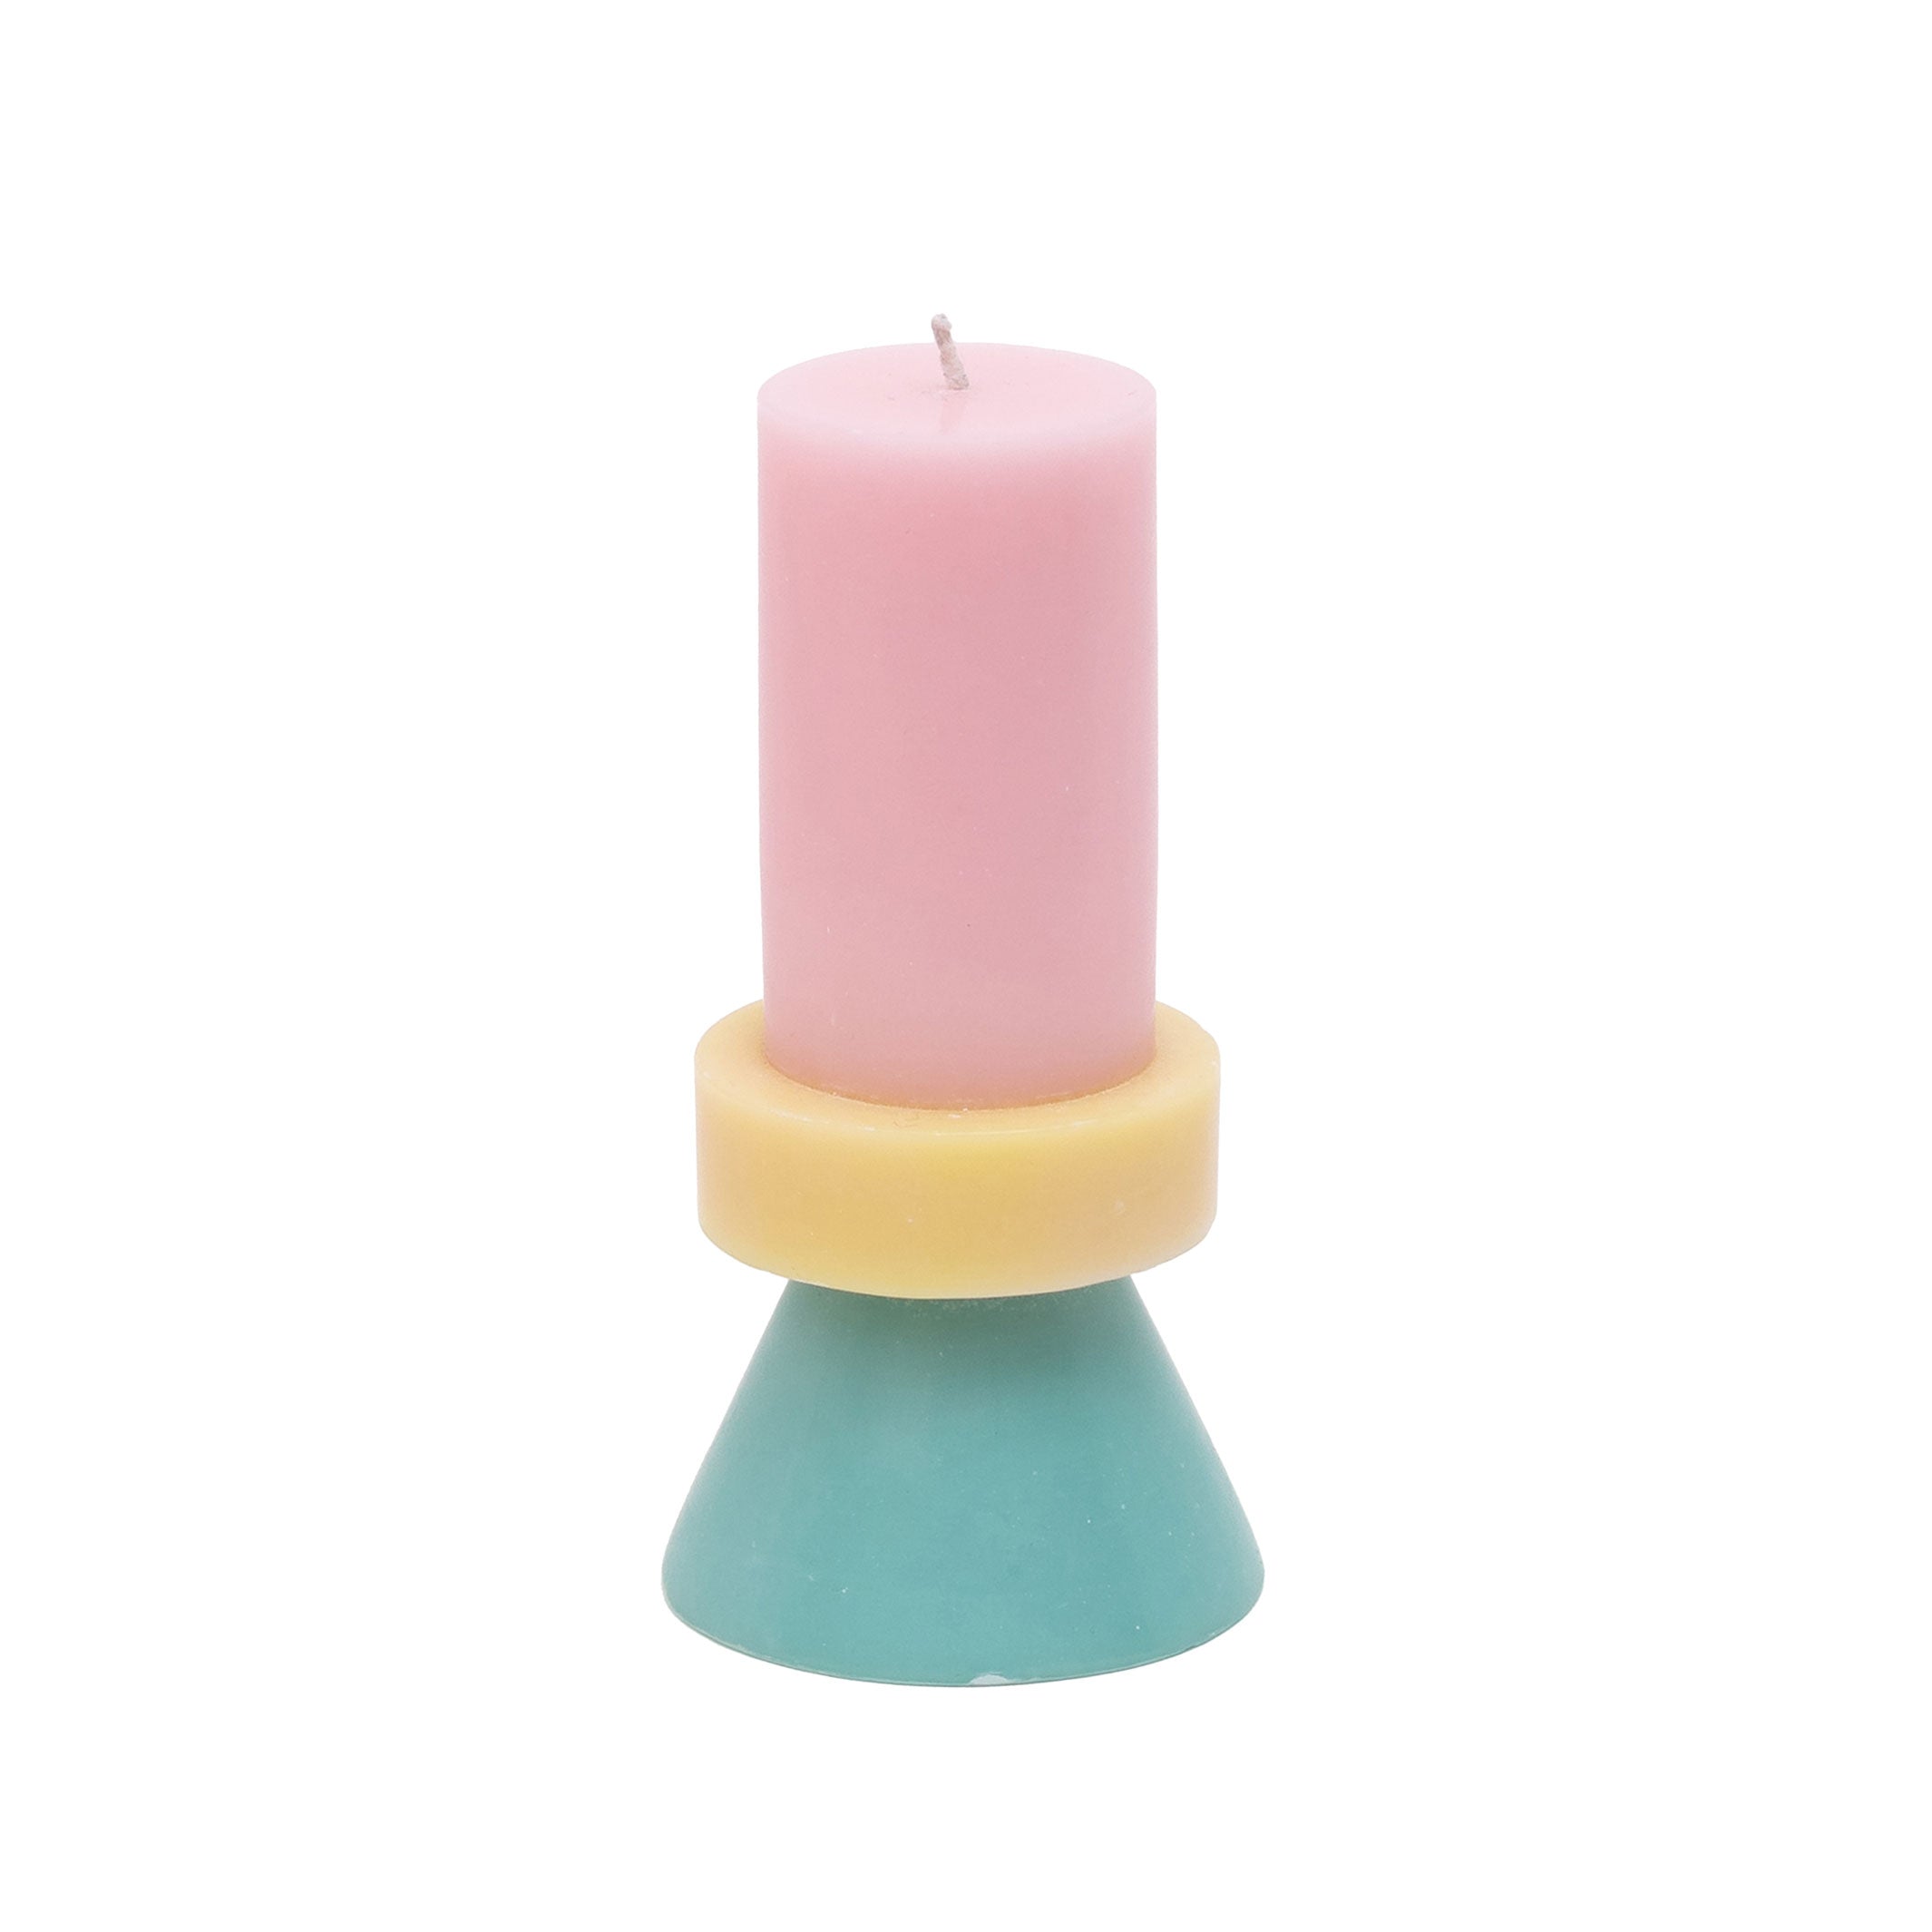 STACK CANDLE TALL | KERZE in Farben flosspink-paleyellow-mint | 30 Std. Brenndauer | YOD AND CO